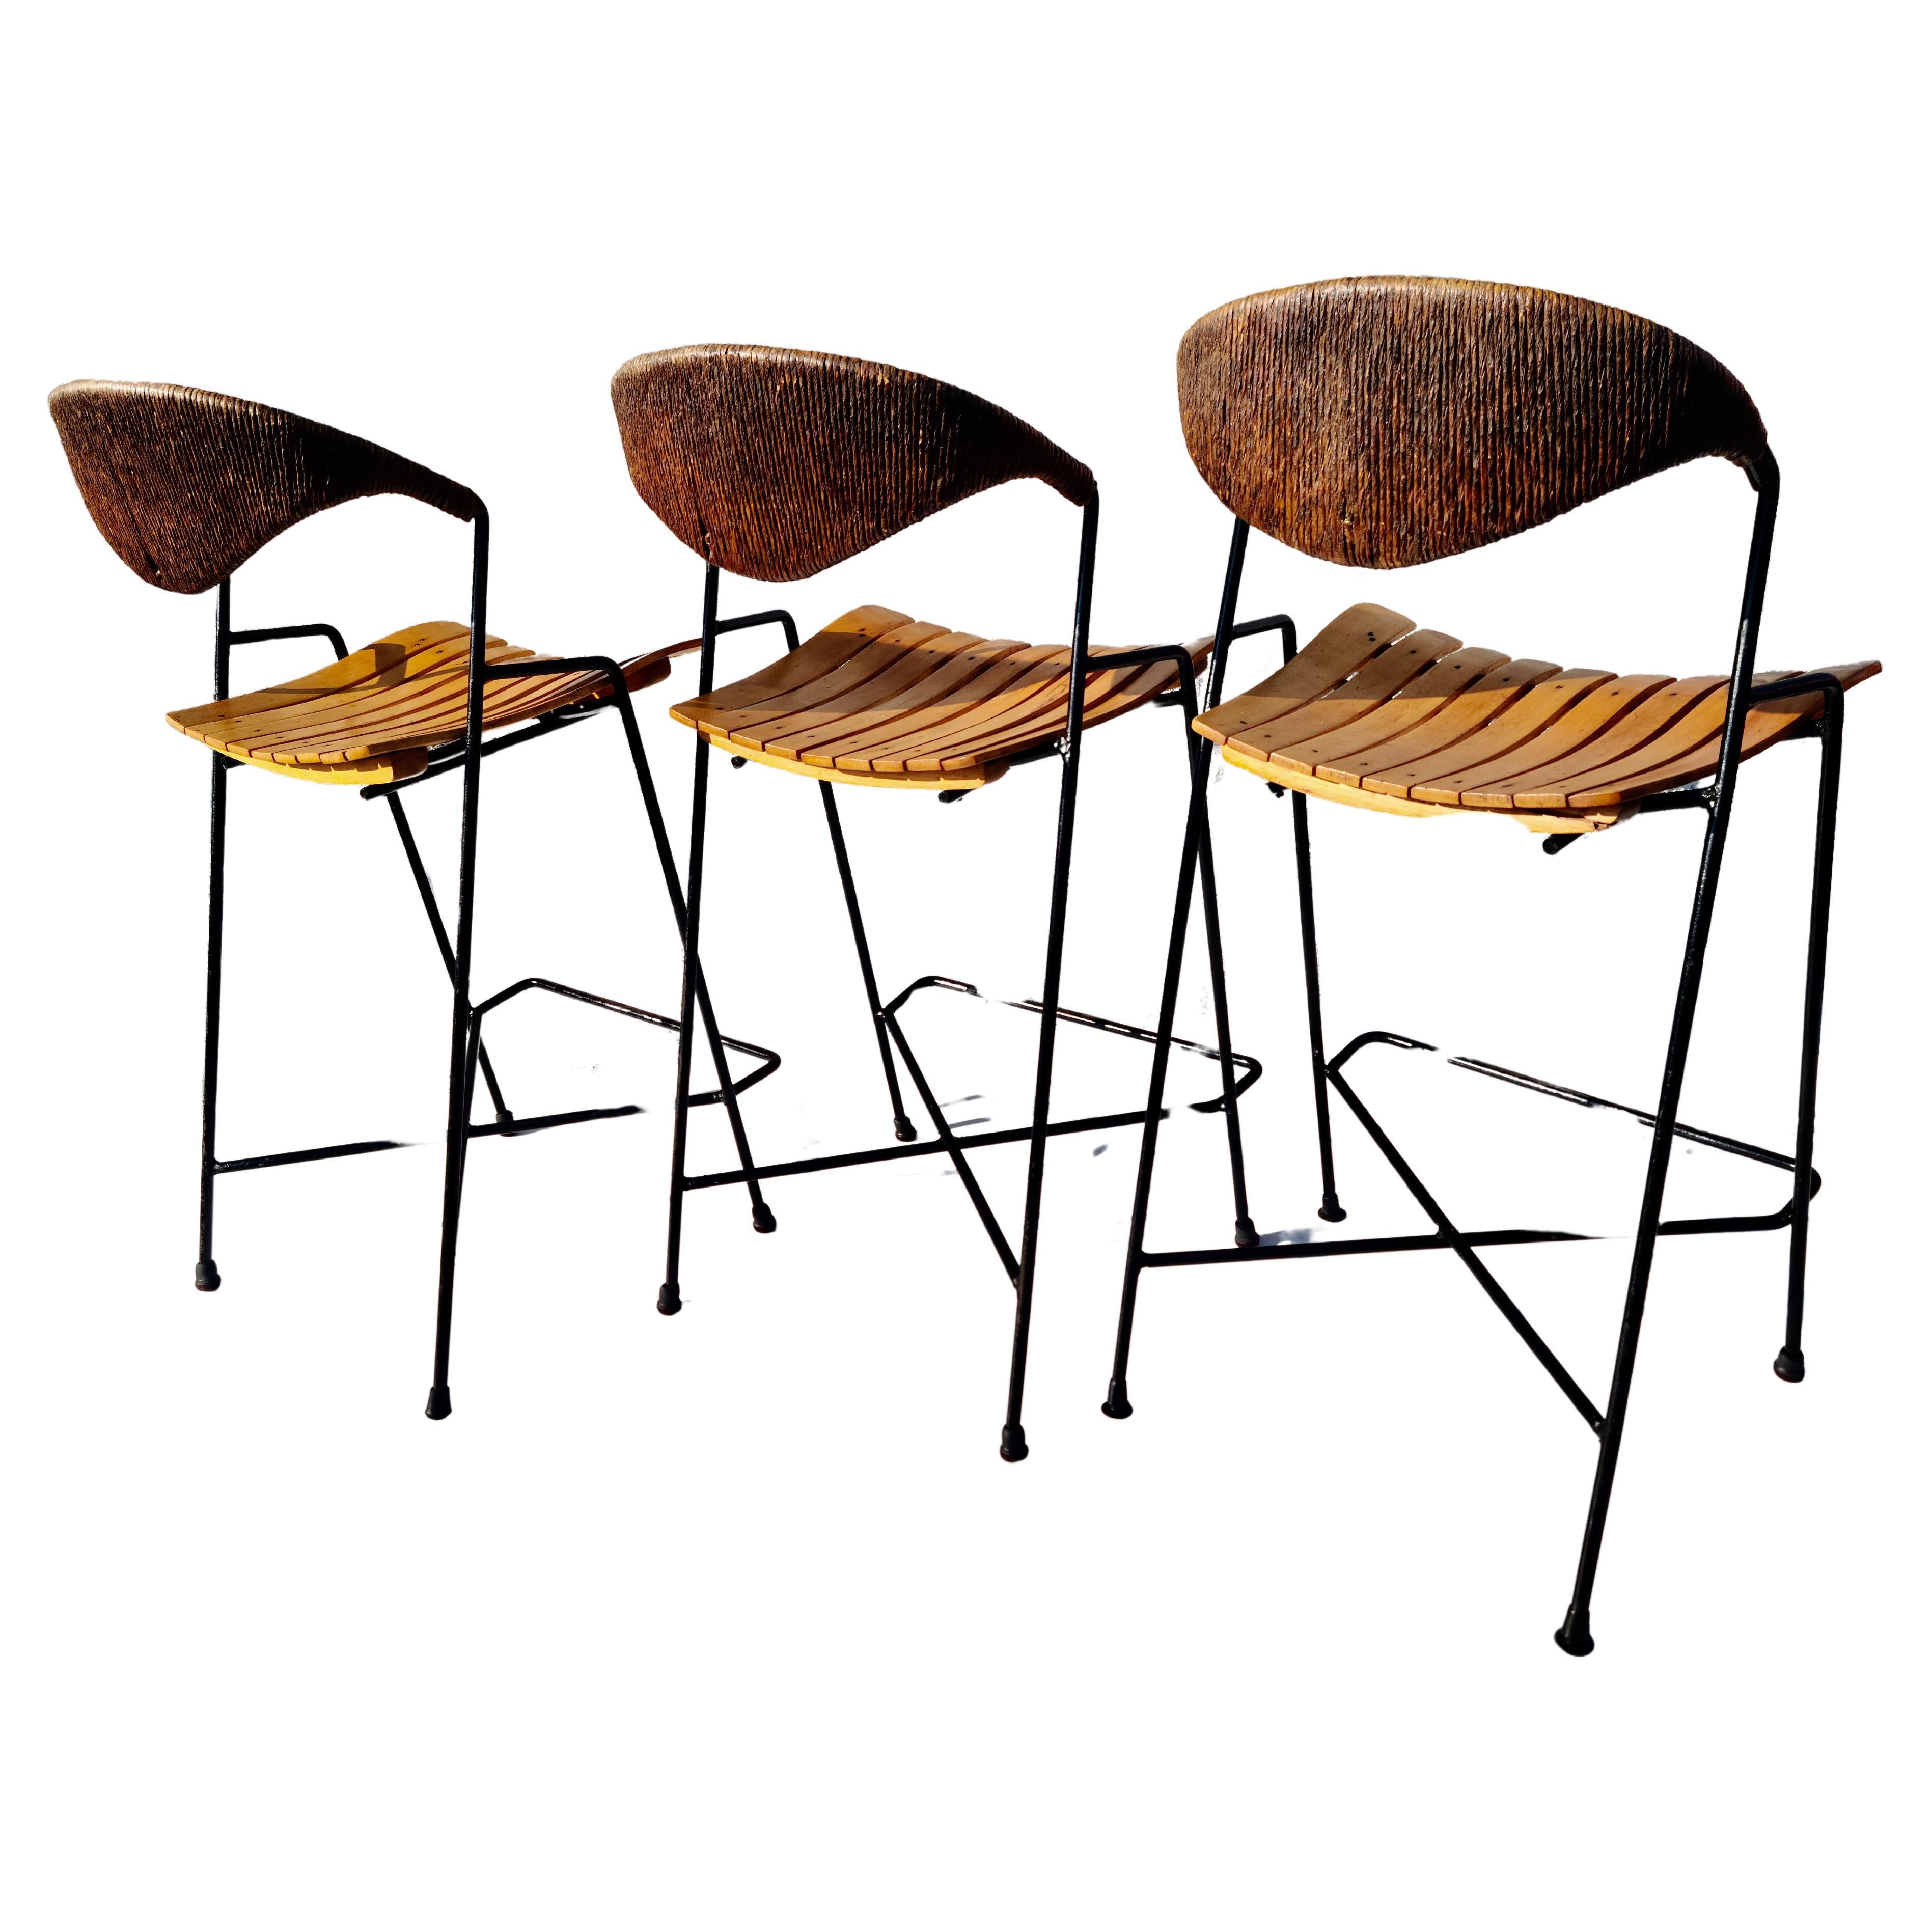 Mid-20th Century Set of 3 Barstools by Arthur Umanoff for Raymor For Sale